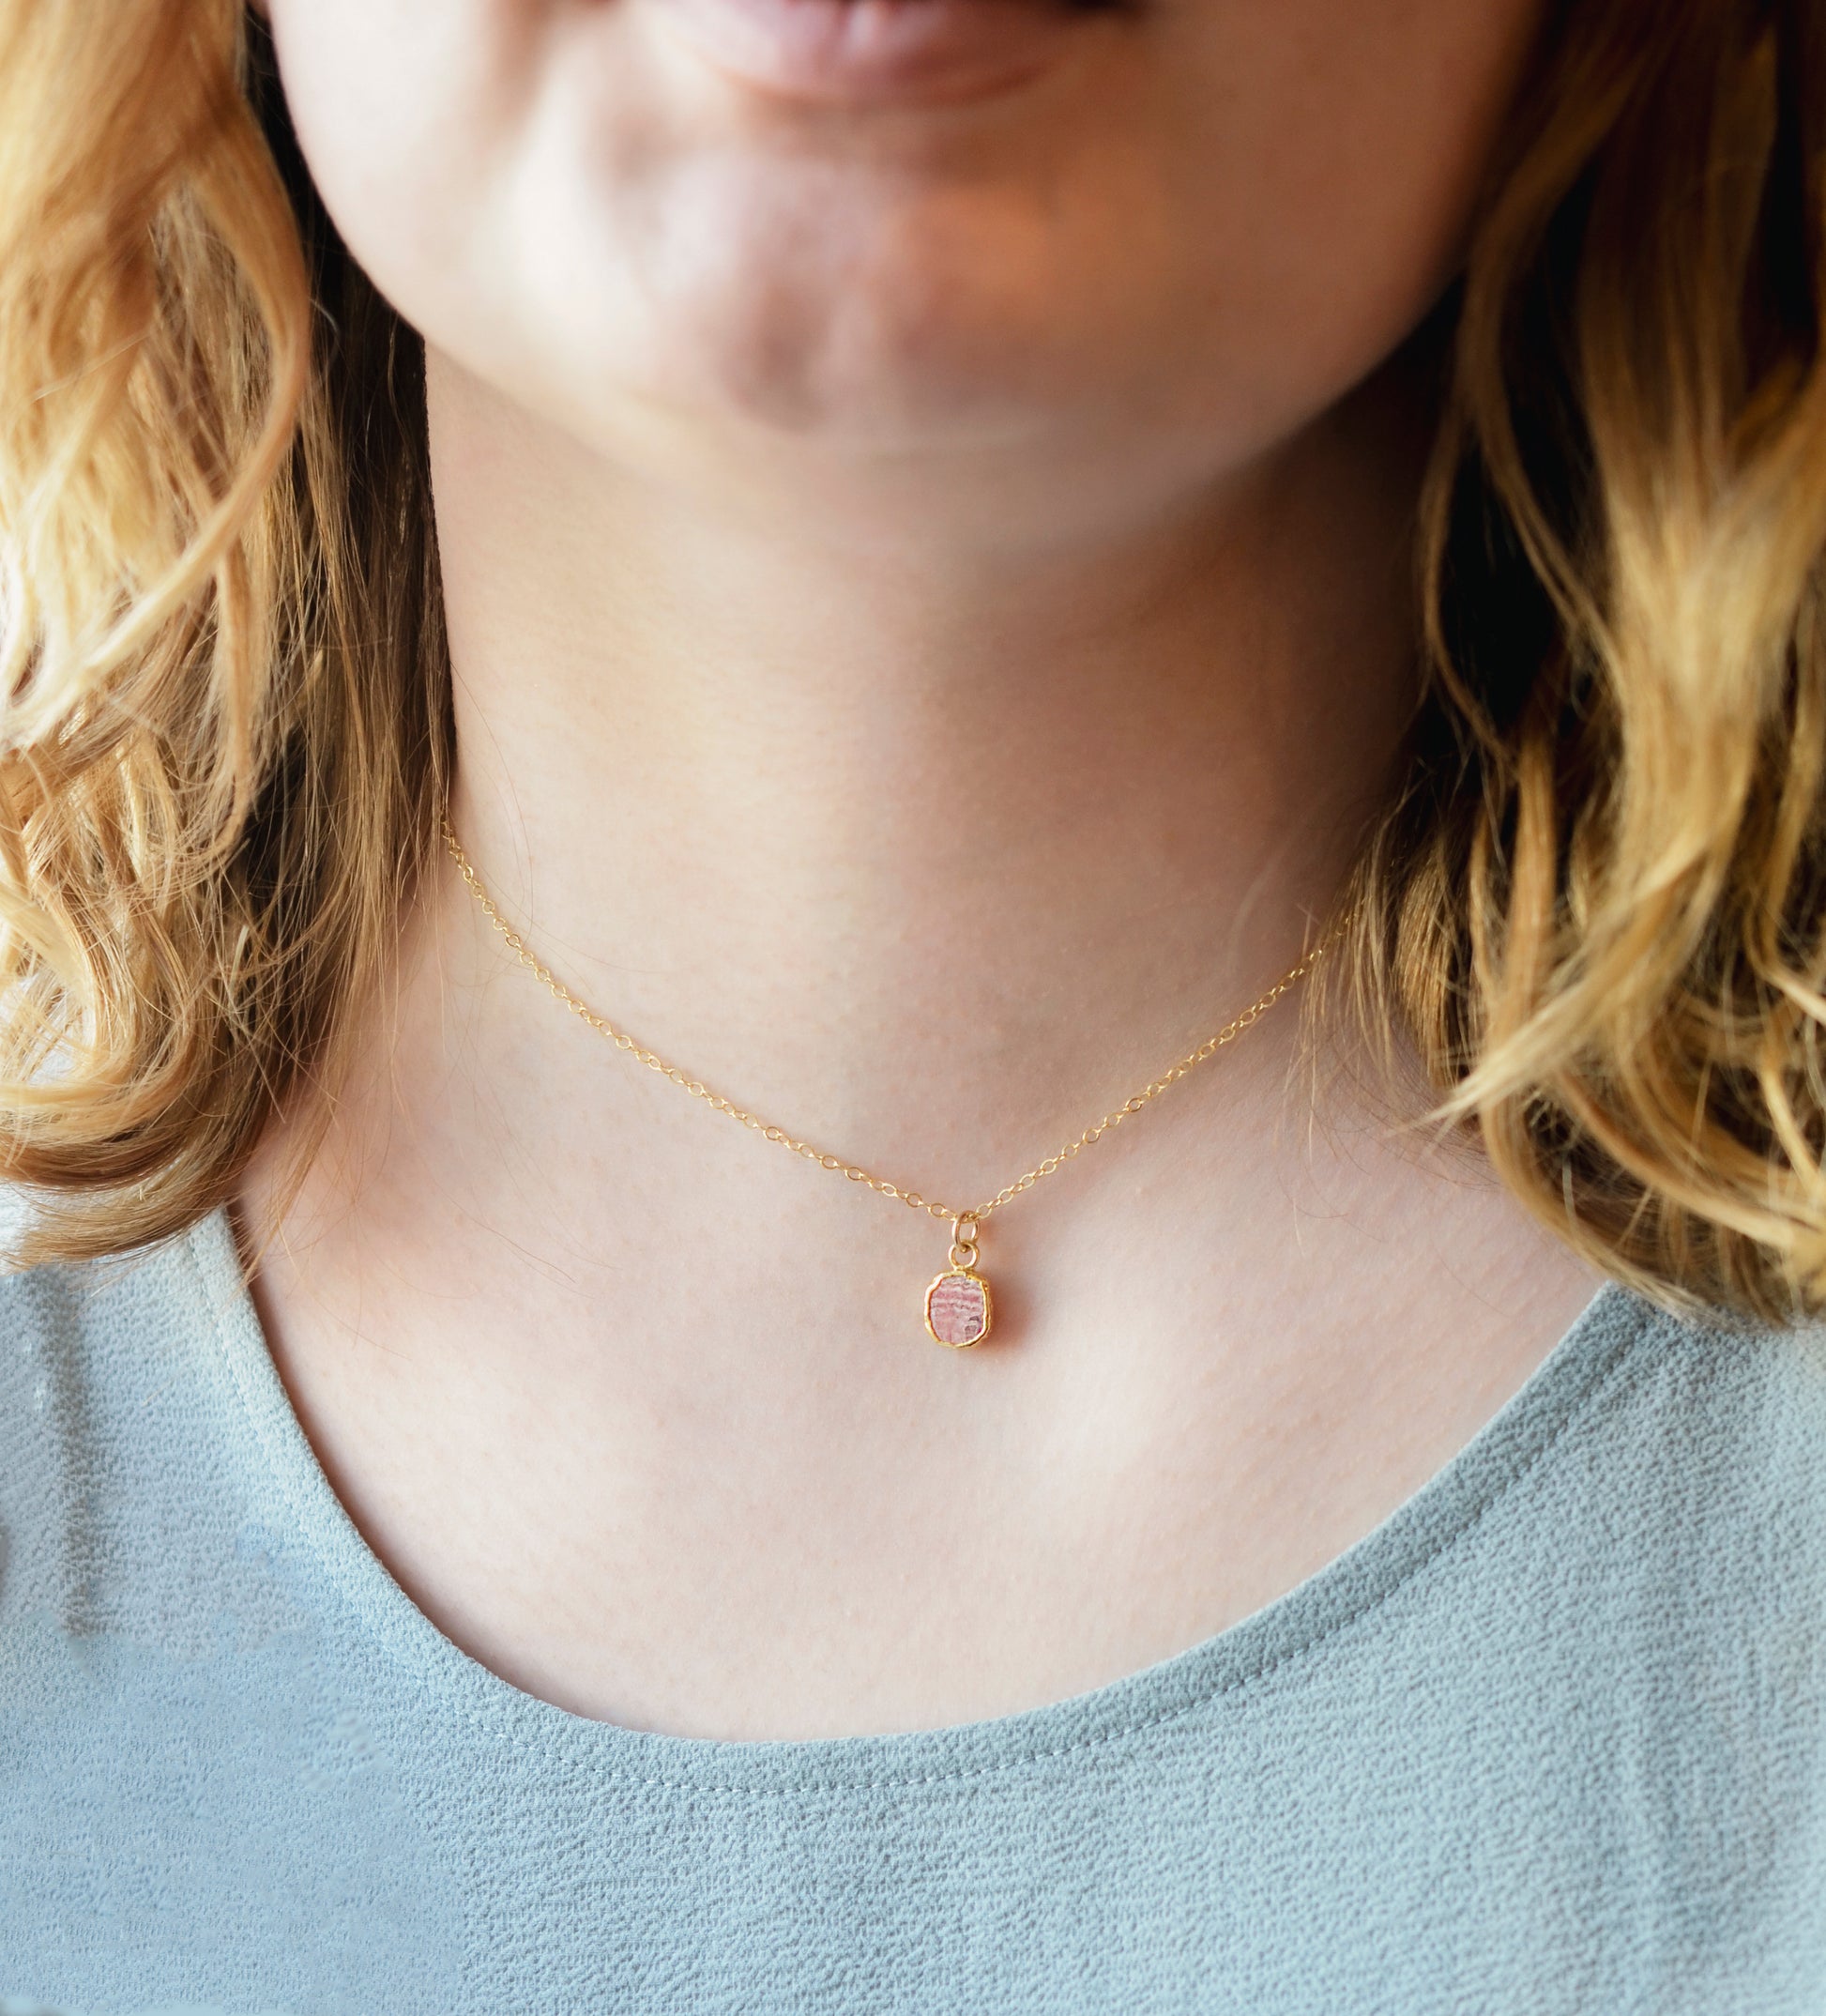 Pale pink Rhodochrosite smooth polished slice set in gold. Shown on a gold chain. Modeled image.